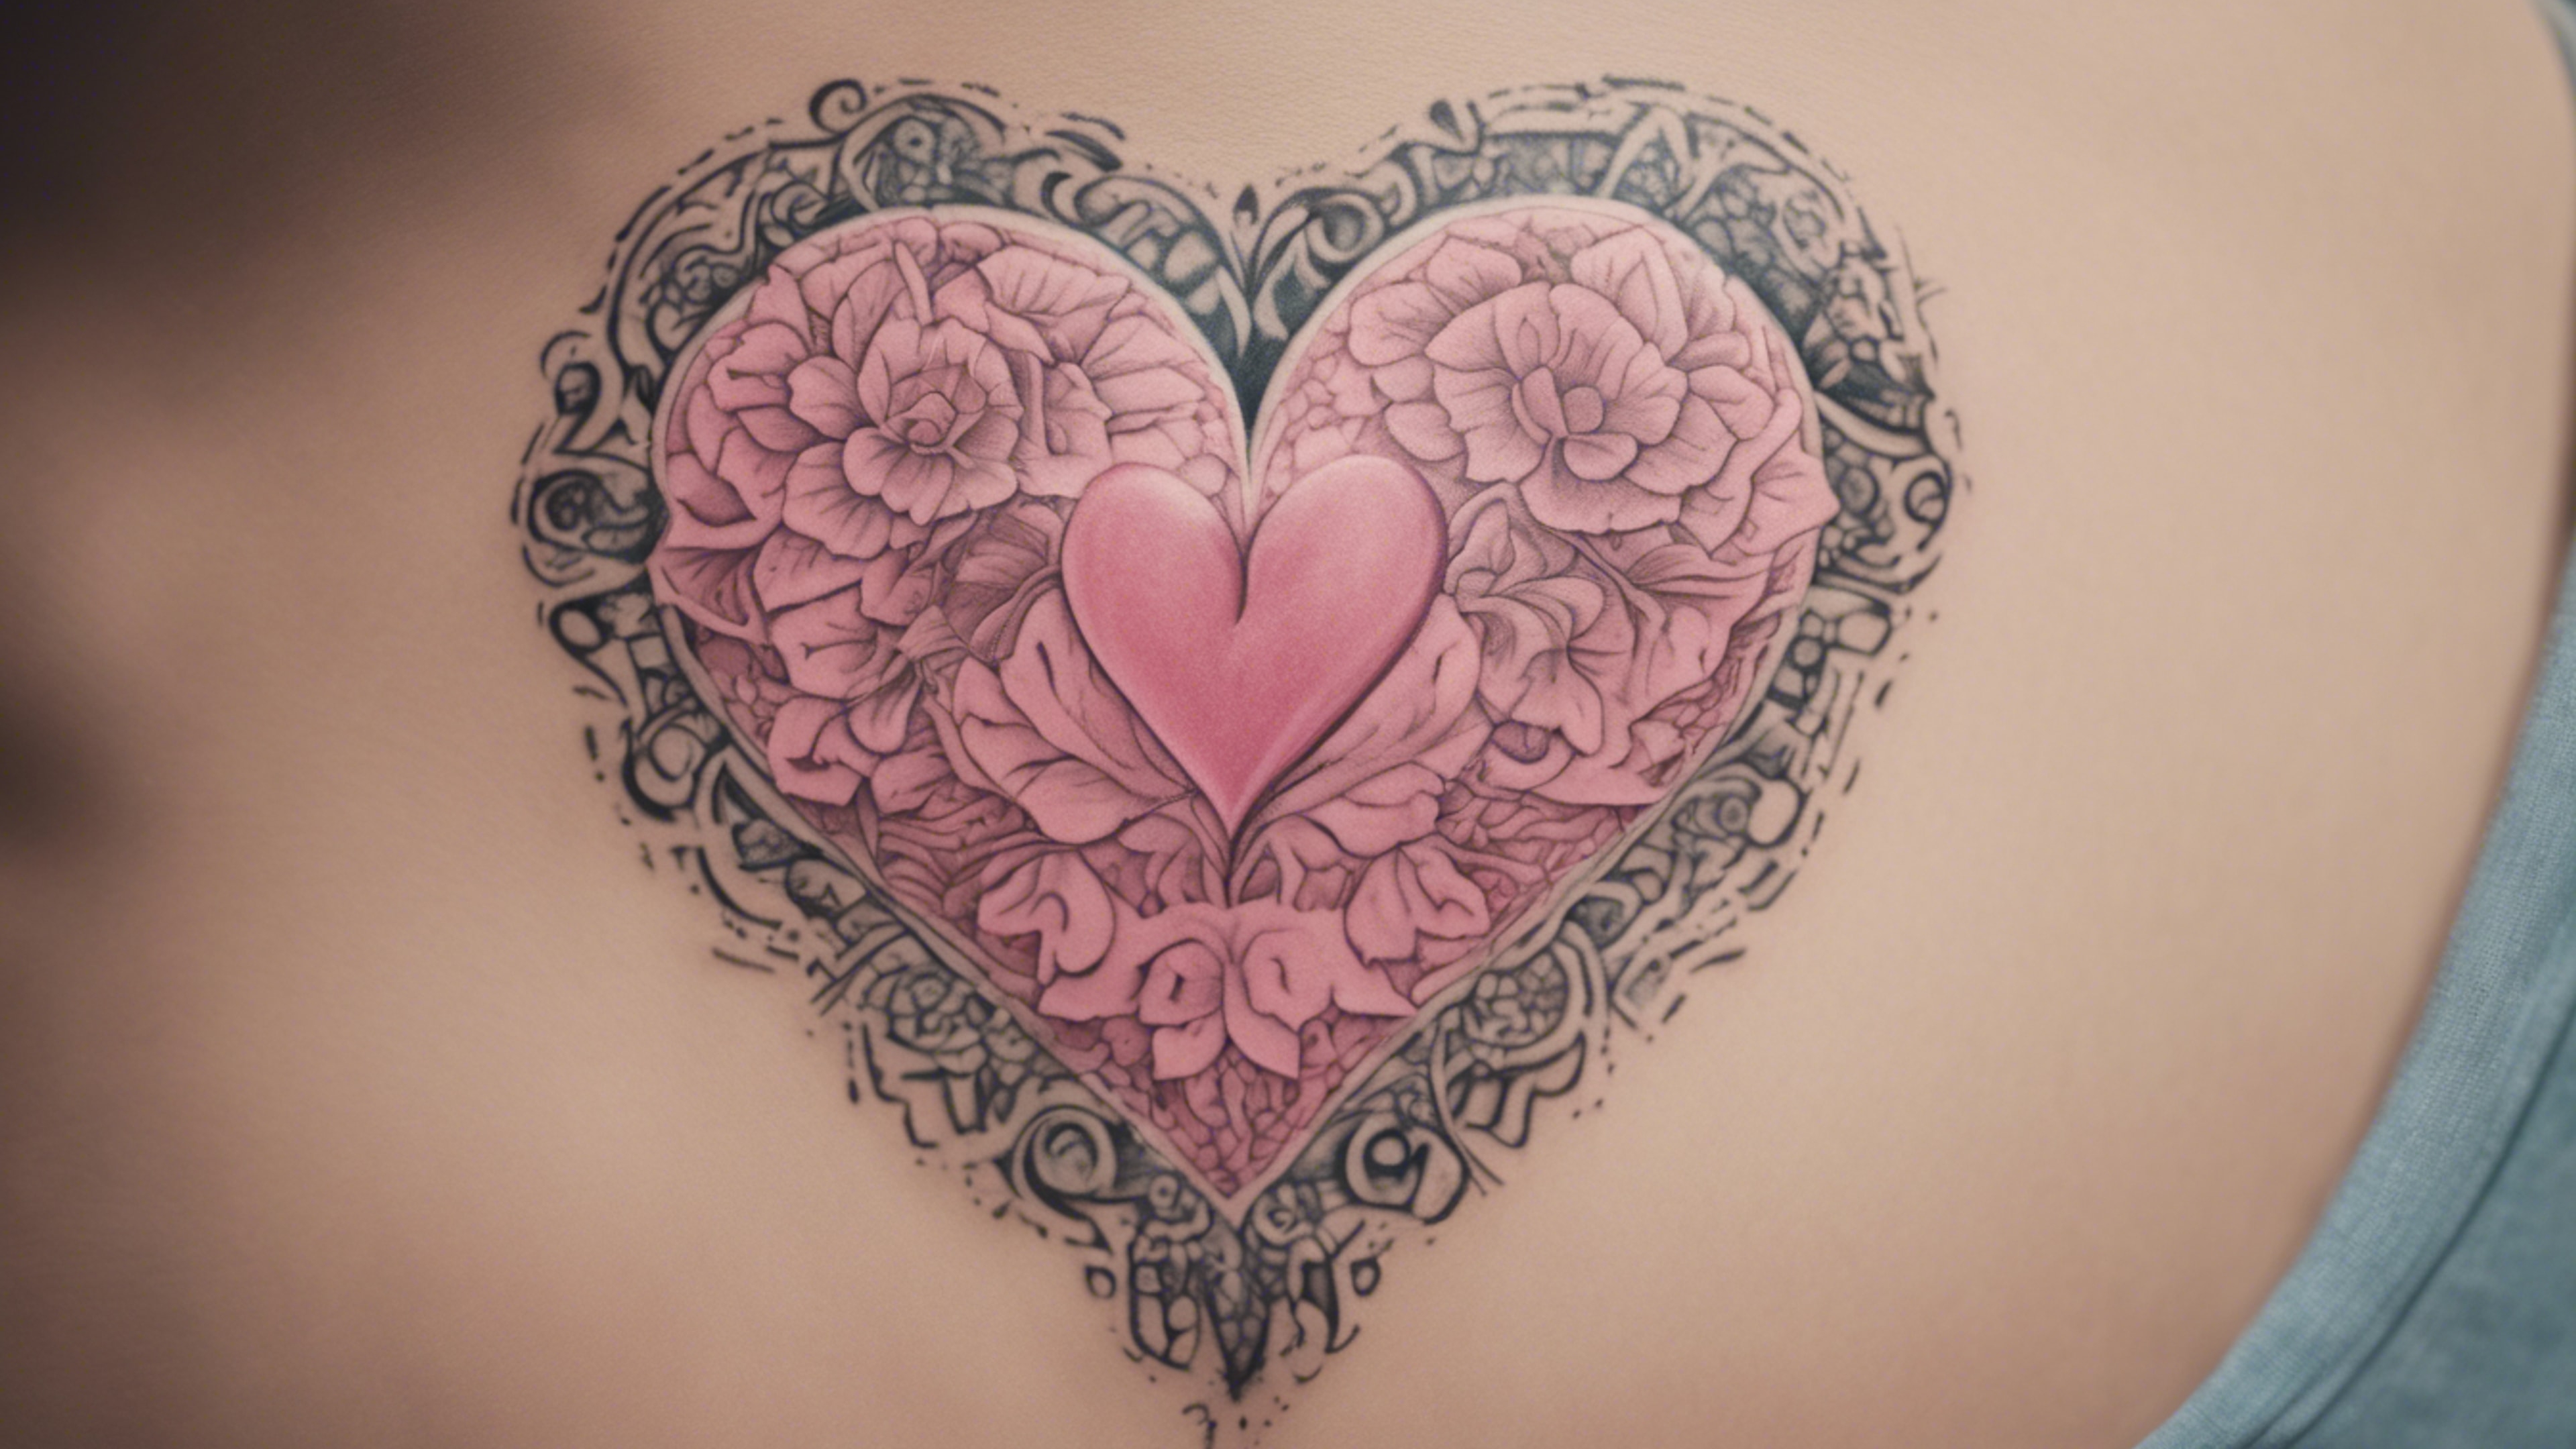 A small pink heart shaped tattoo embellished with intricate floral patterns. Ταπετσαρία[dd23c5855ab44f40b2fe]